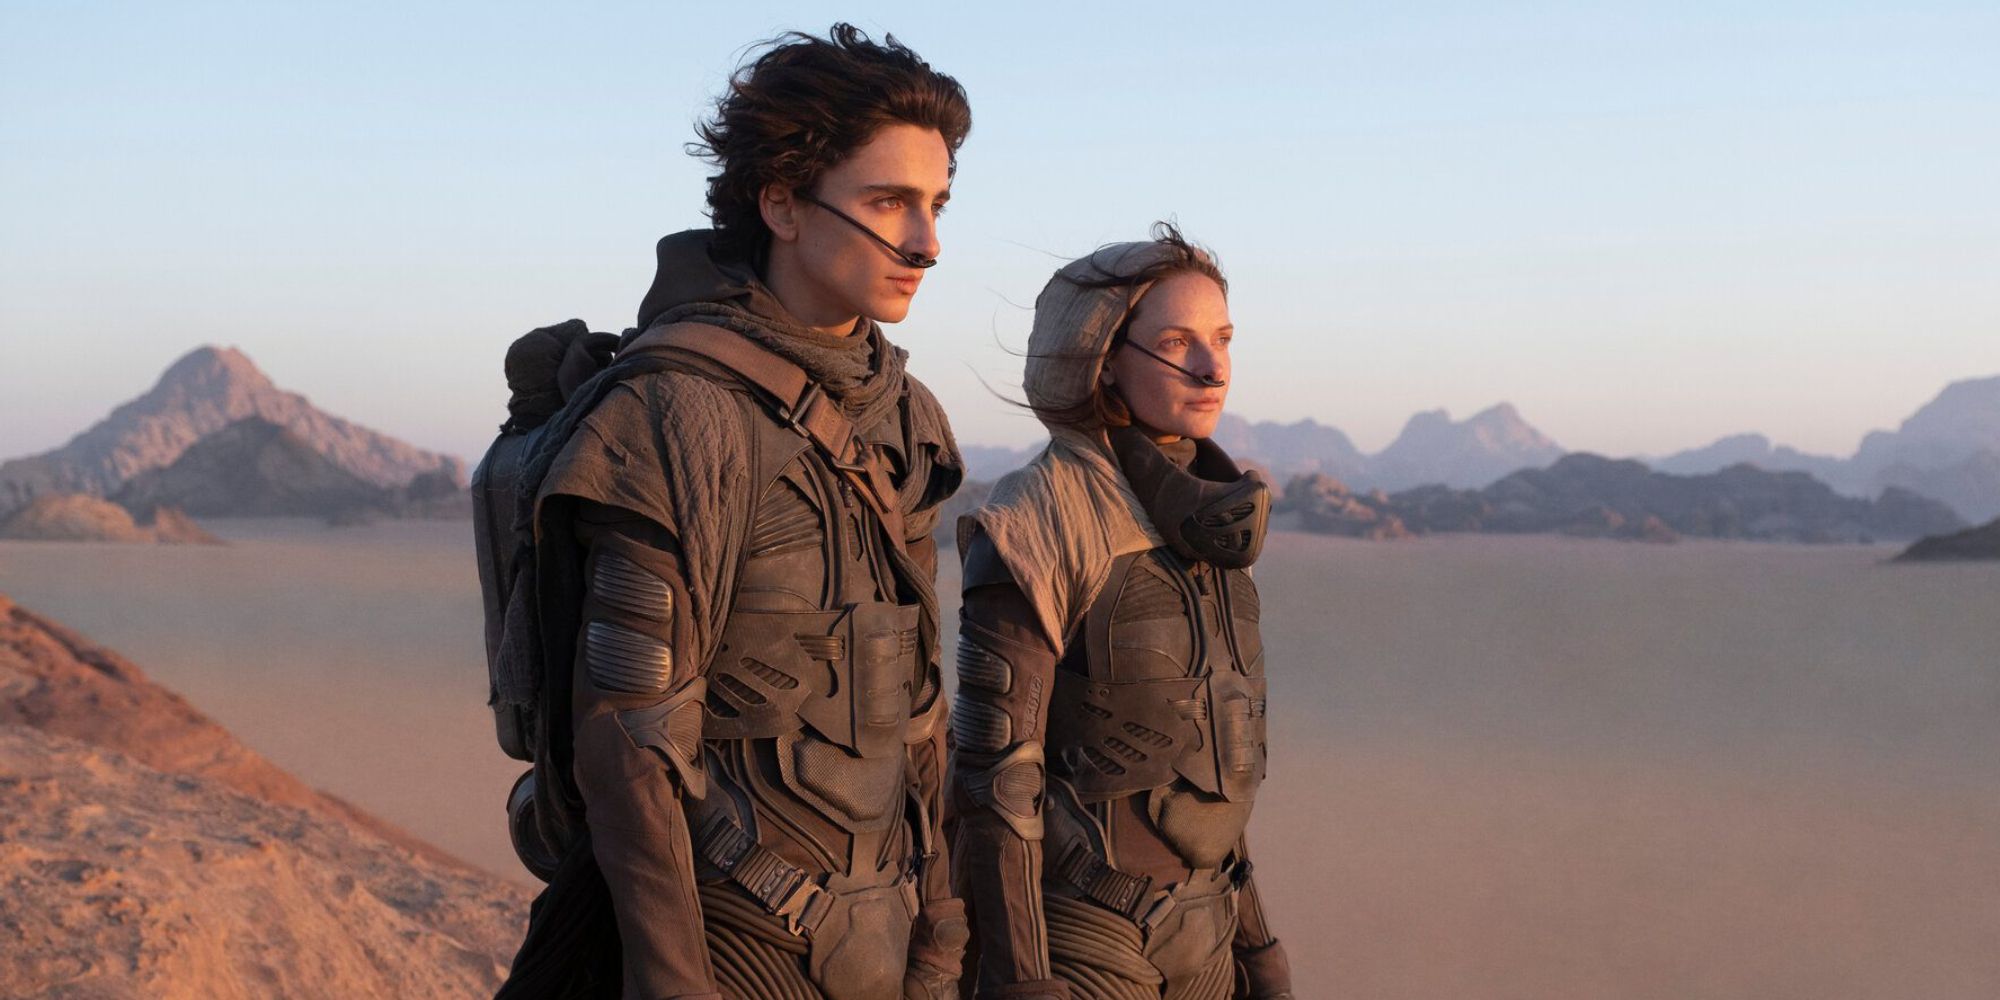 Paul and Jessica in the Arrakis desert looking to the distance in Dune - 2021